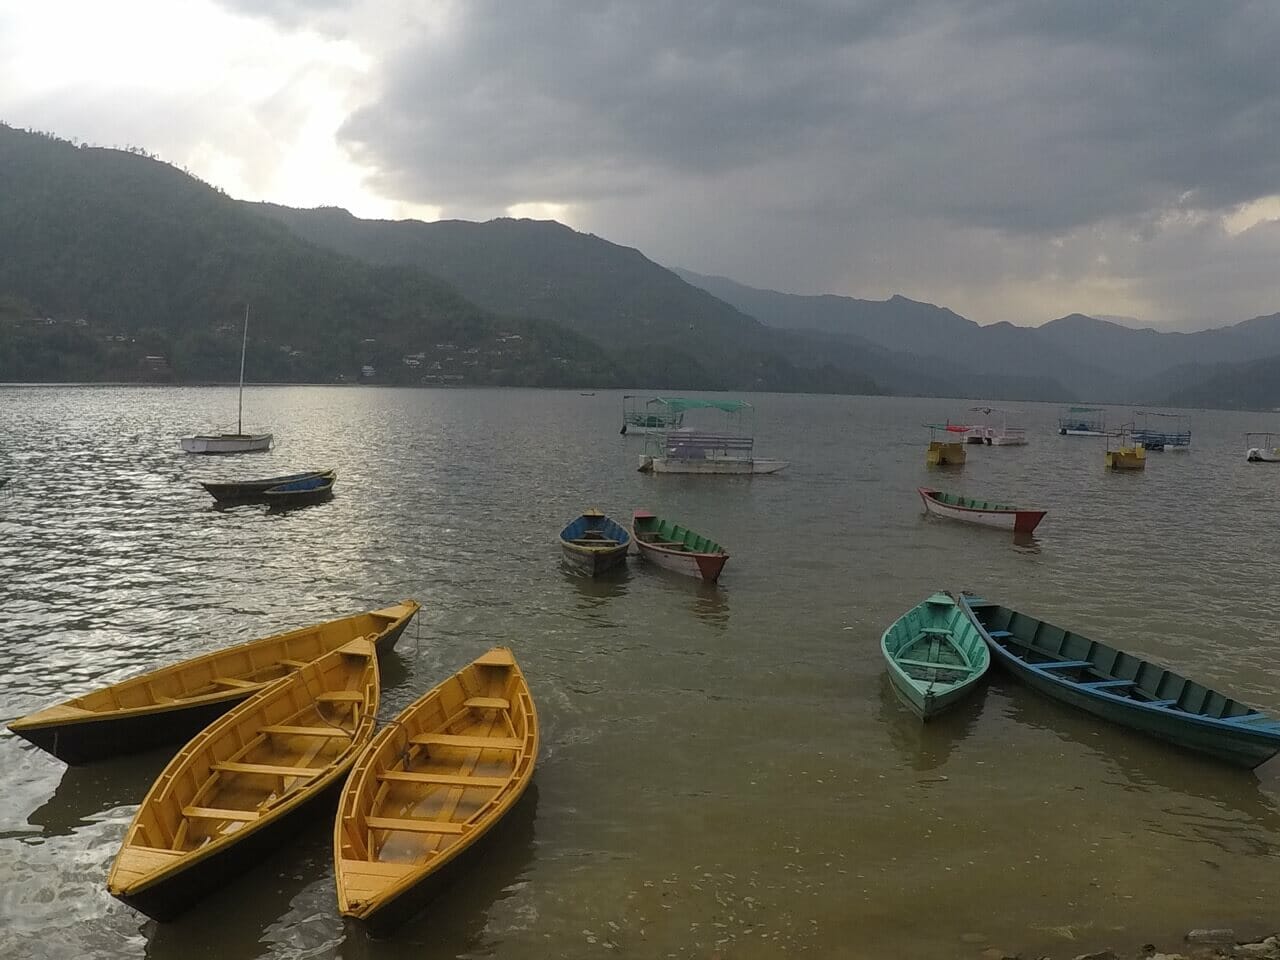 Boats of different colours on a lake in Pokhara, Nepal, and mountains in the background